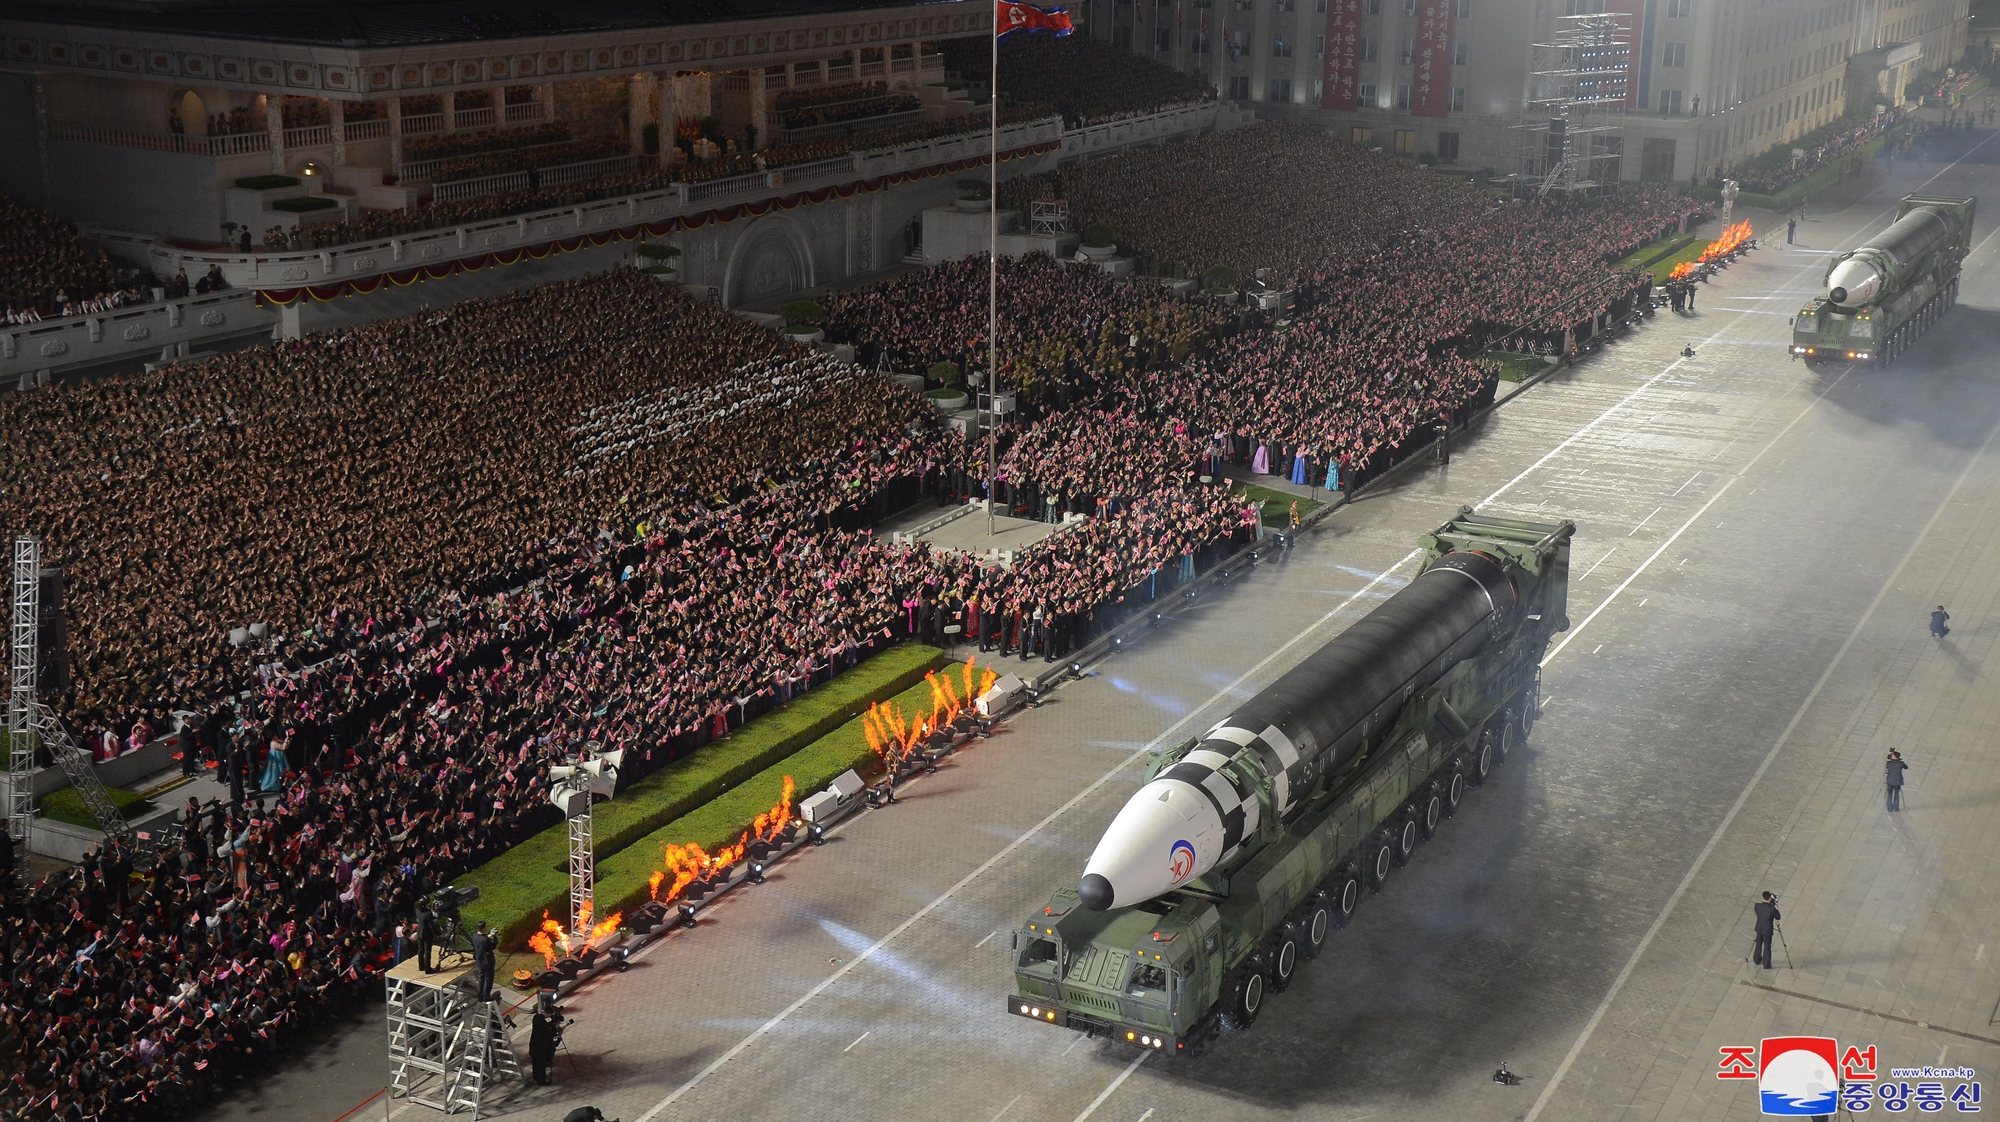 epa09909418 A photo released by the official North Korean Central News Agency (KCNA) shows a new Hwasong-17 missile displayed in a military parade held to celebrate the the 90th founding anniversary of the Korean People&#039;s Revolutionary Army (KPRA), at Kim Il Sung Square in Pyongyang, North Korea, 25 April 2022 (issued 26 April 2022).  EPA/KCNA   EDITORIAL USE ONLY